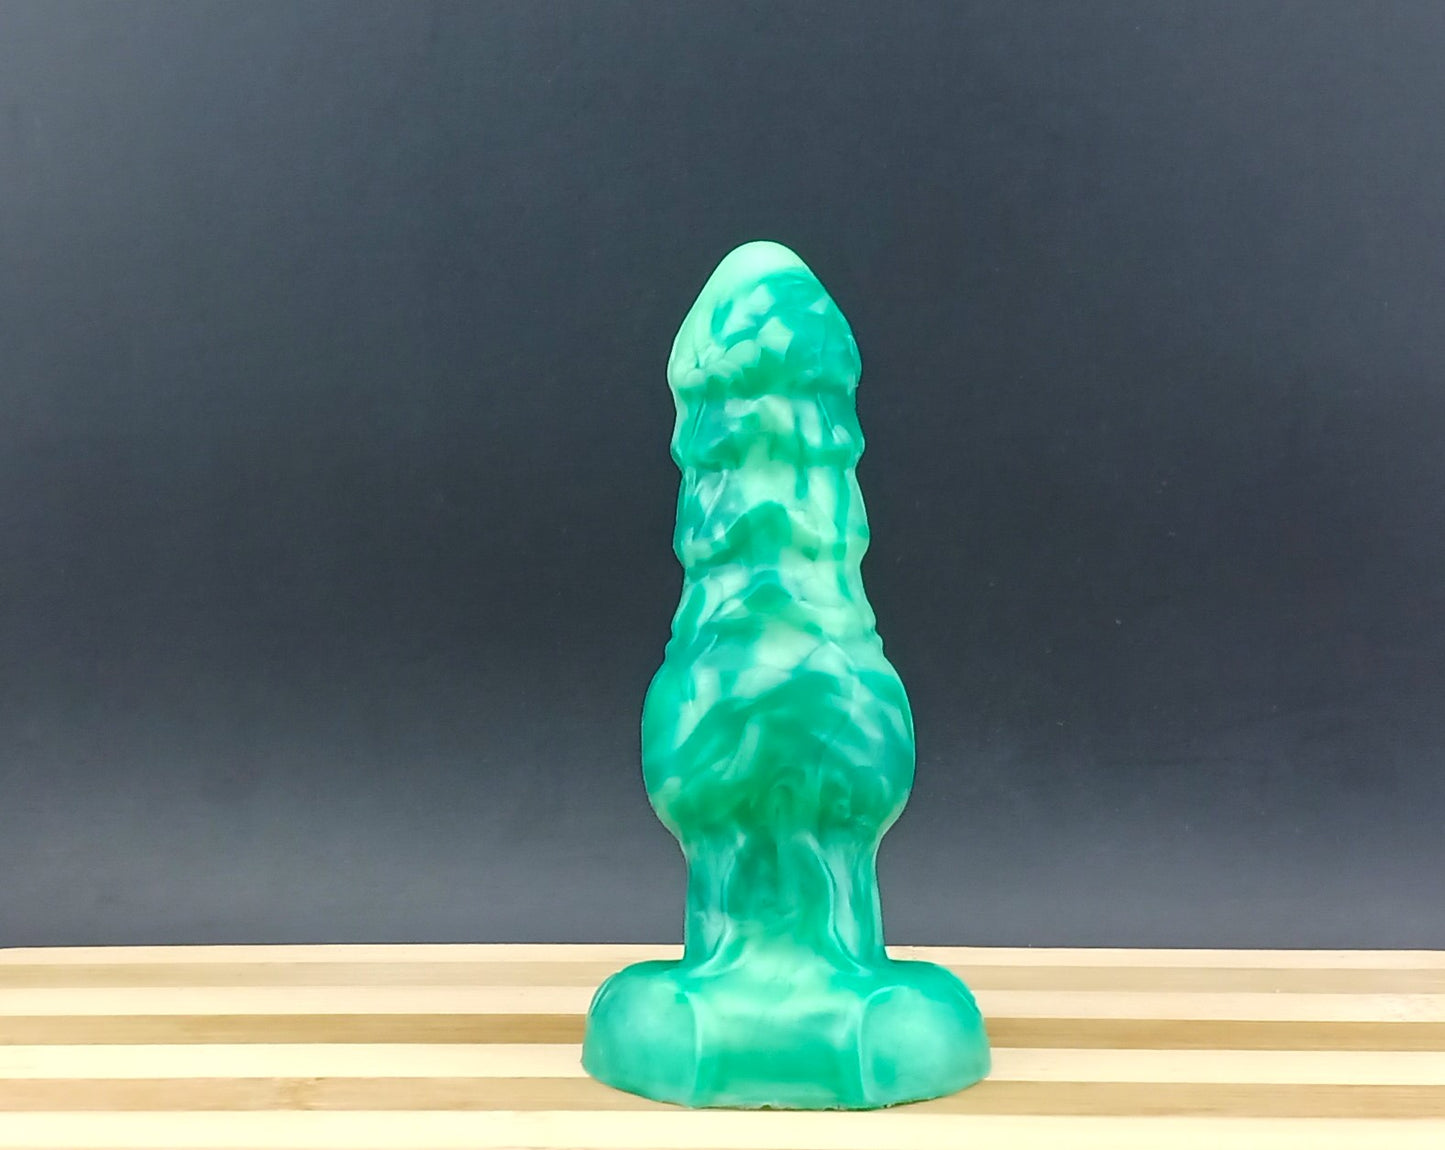 Drokken - Small Size - Double Green Marble - Suction Cup Base - 00-50 Firmness - Flop - Suction Cup Uneven